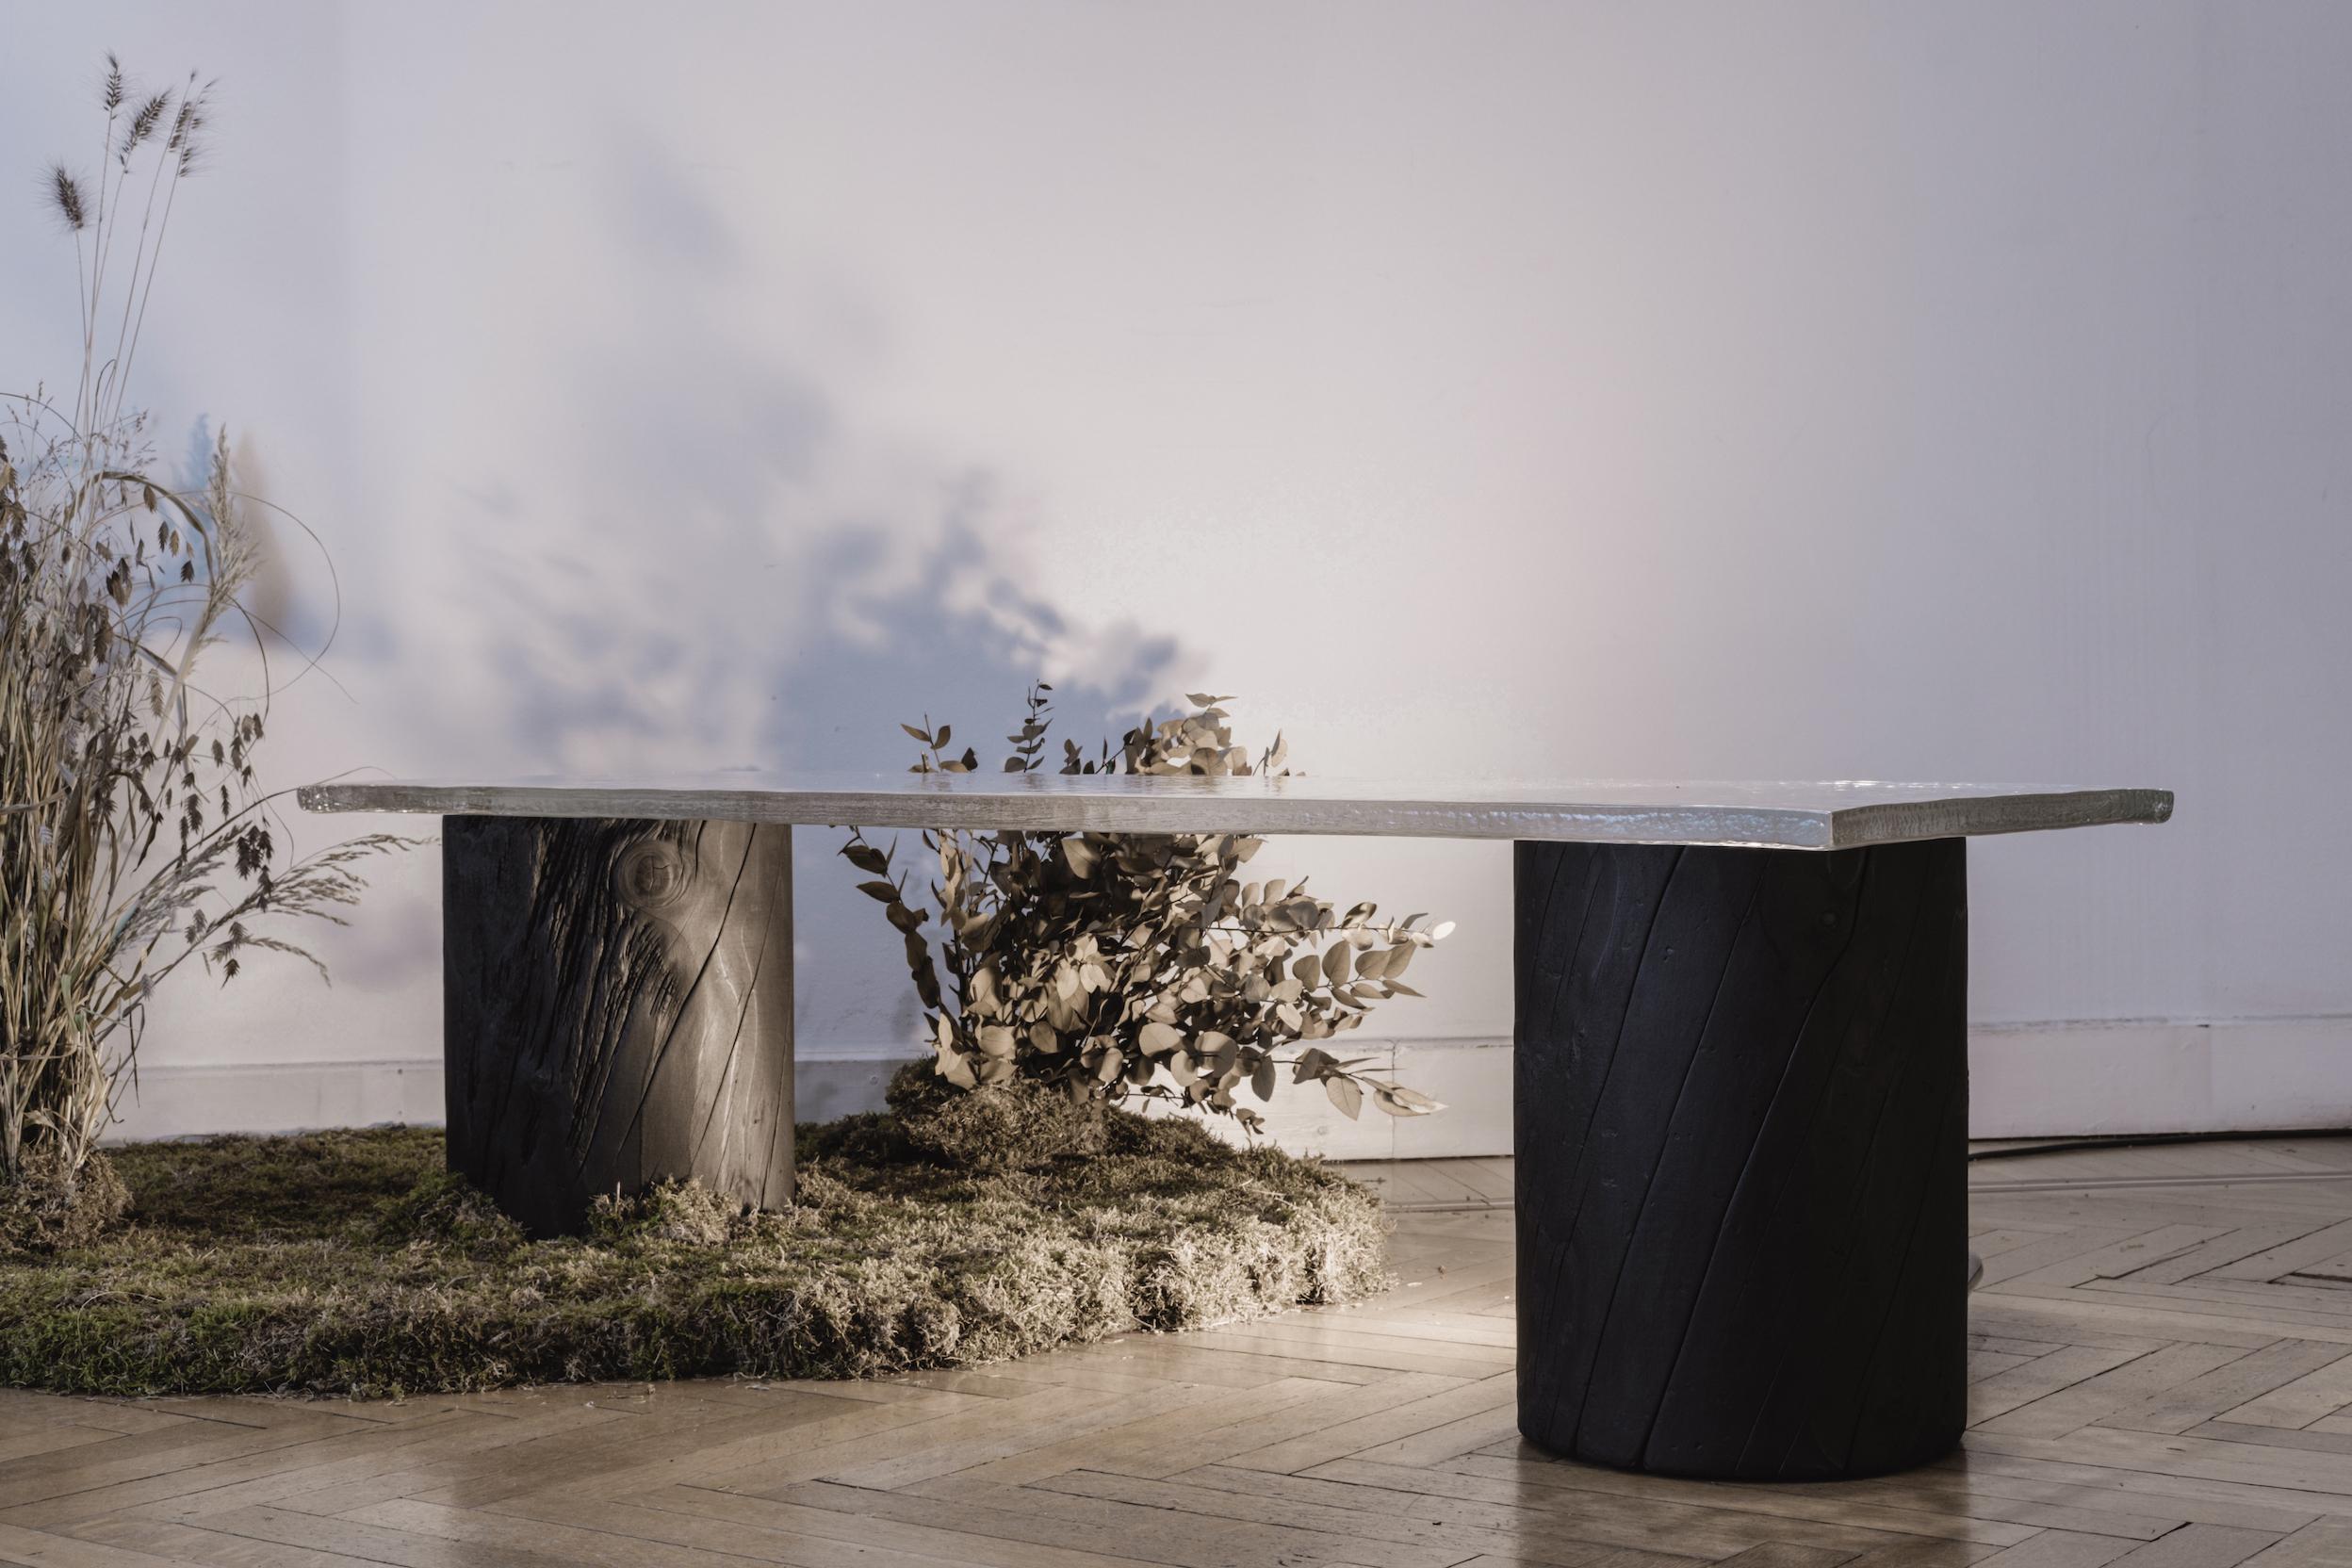 Tiptoe Banch by dAM Atelier
Dimensions: L 150 x W 40 x H 45
Materials: Solid Ash Wood, Casted Glass

dAM atelier is a duo of young Italian architects sharing the passion for design and architecture, Paolo d’Alessandro and Marco Malgarini.
The